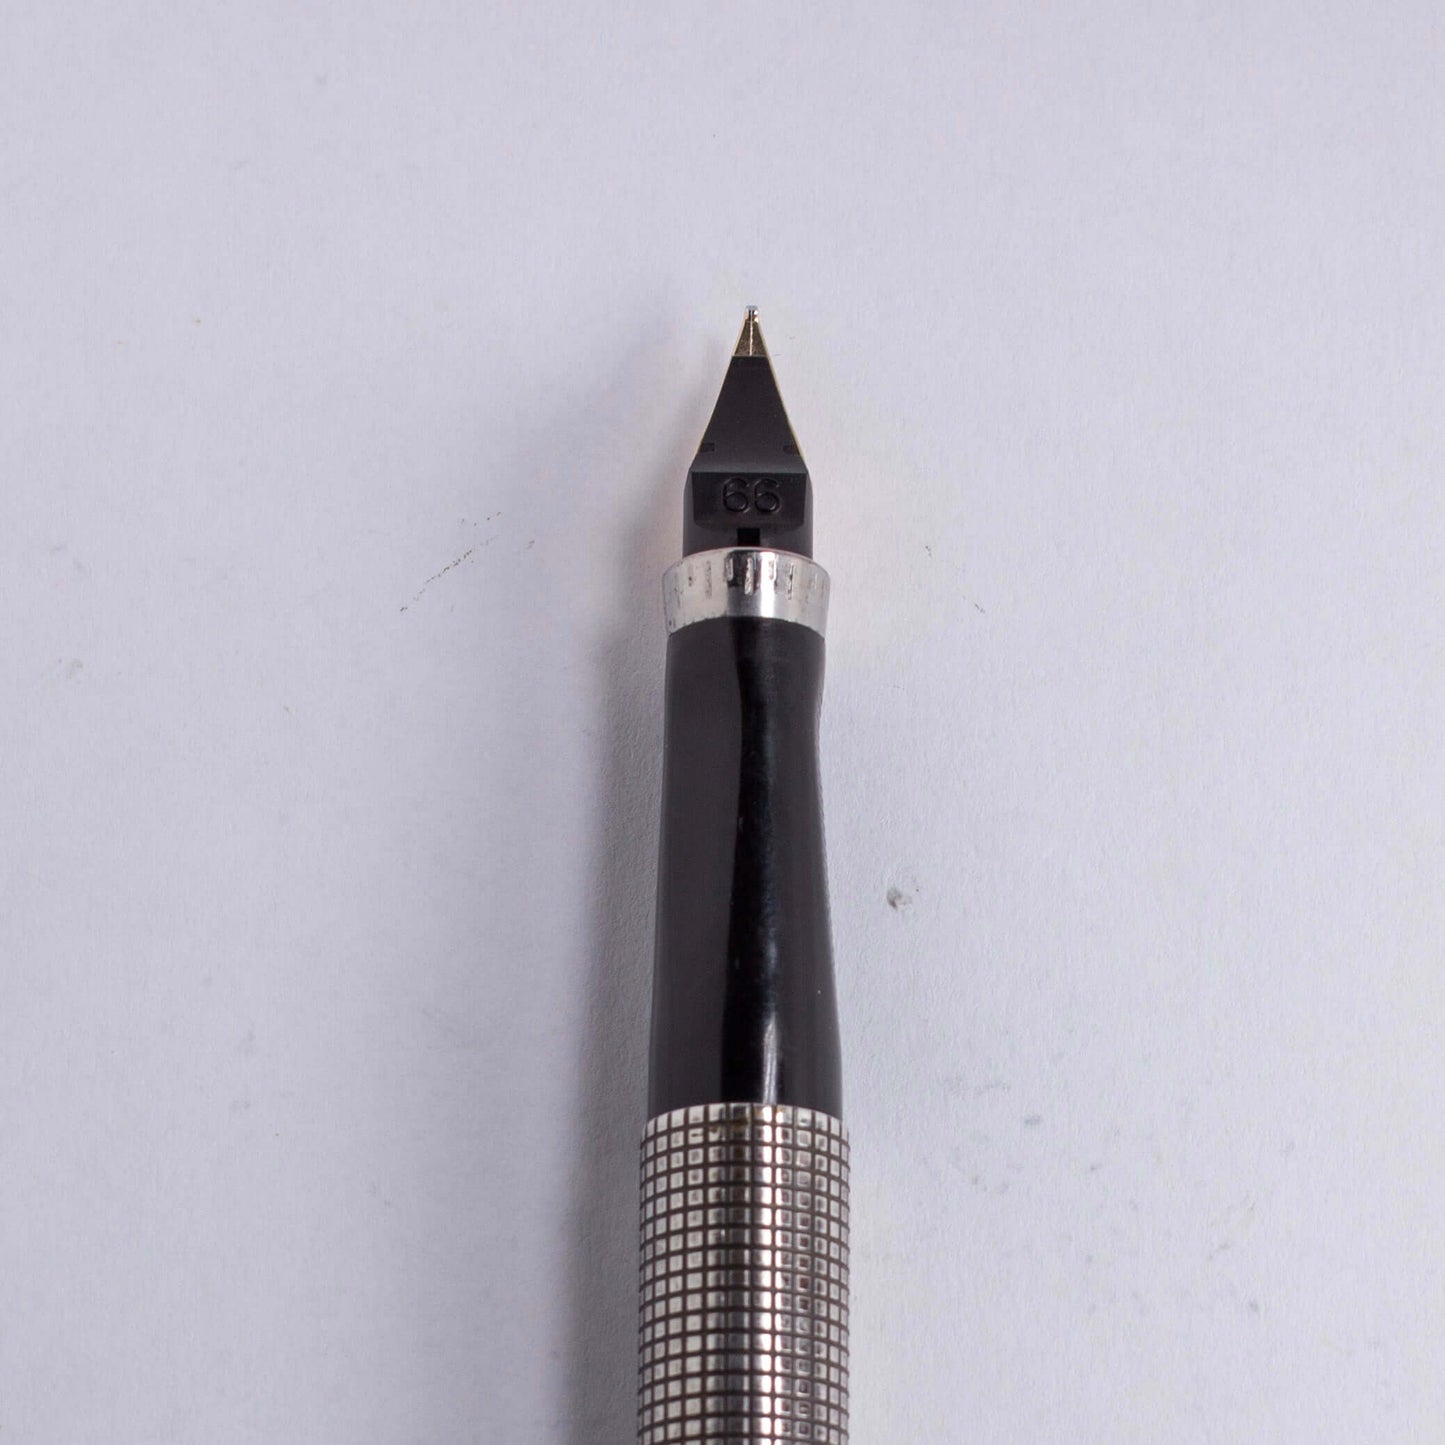 Restored Parker 75, Sterling Silver Ciselé, Medium 14K nib .66, Made in U.S.A.Name/Type: Parker 75 Manufacture Year: 1970's Length: 5 1/8 Filling System: Parker Cartridges or Converter Color/Pattern: Sterling Silver Ciselé Nib Type/Condition and remarks: